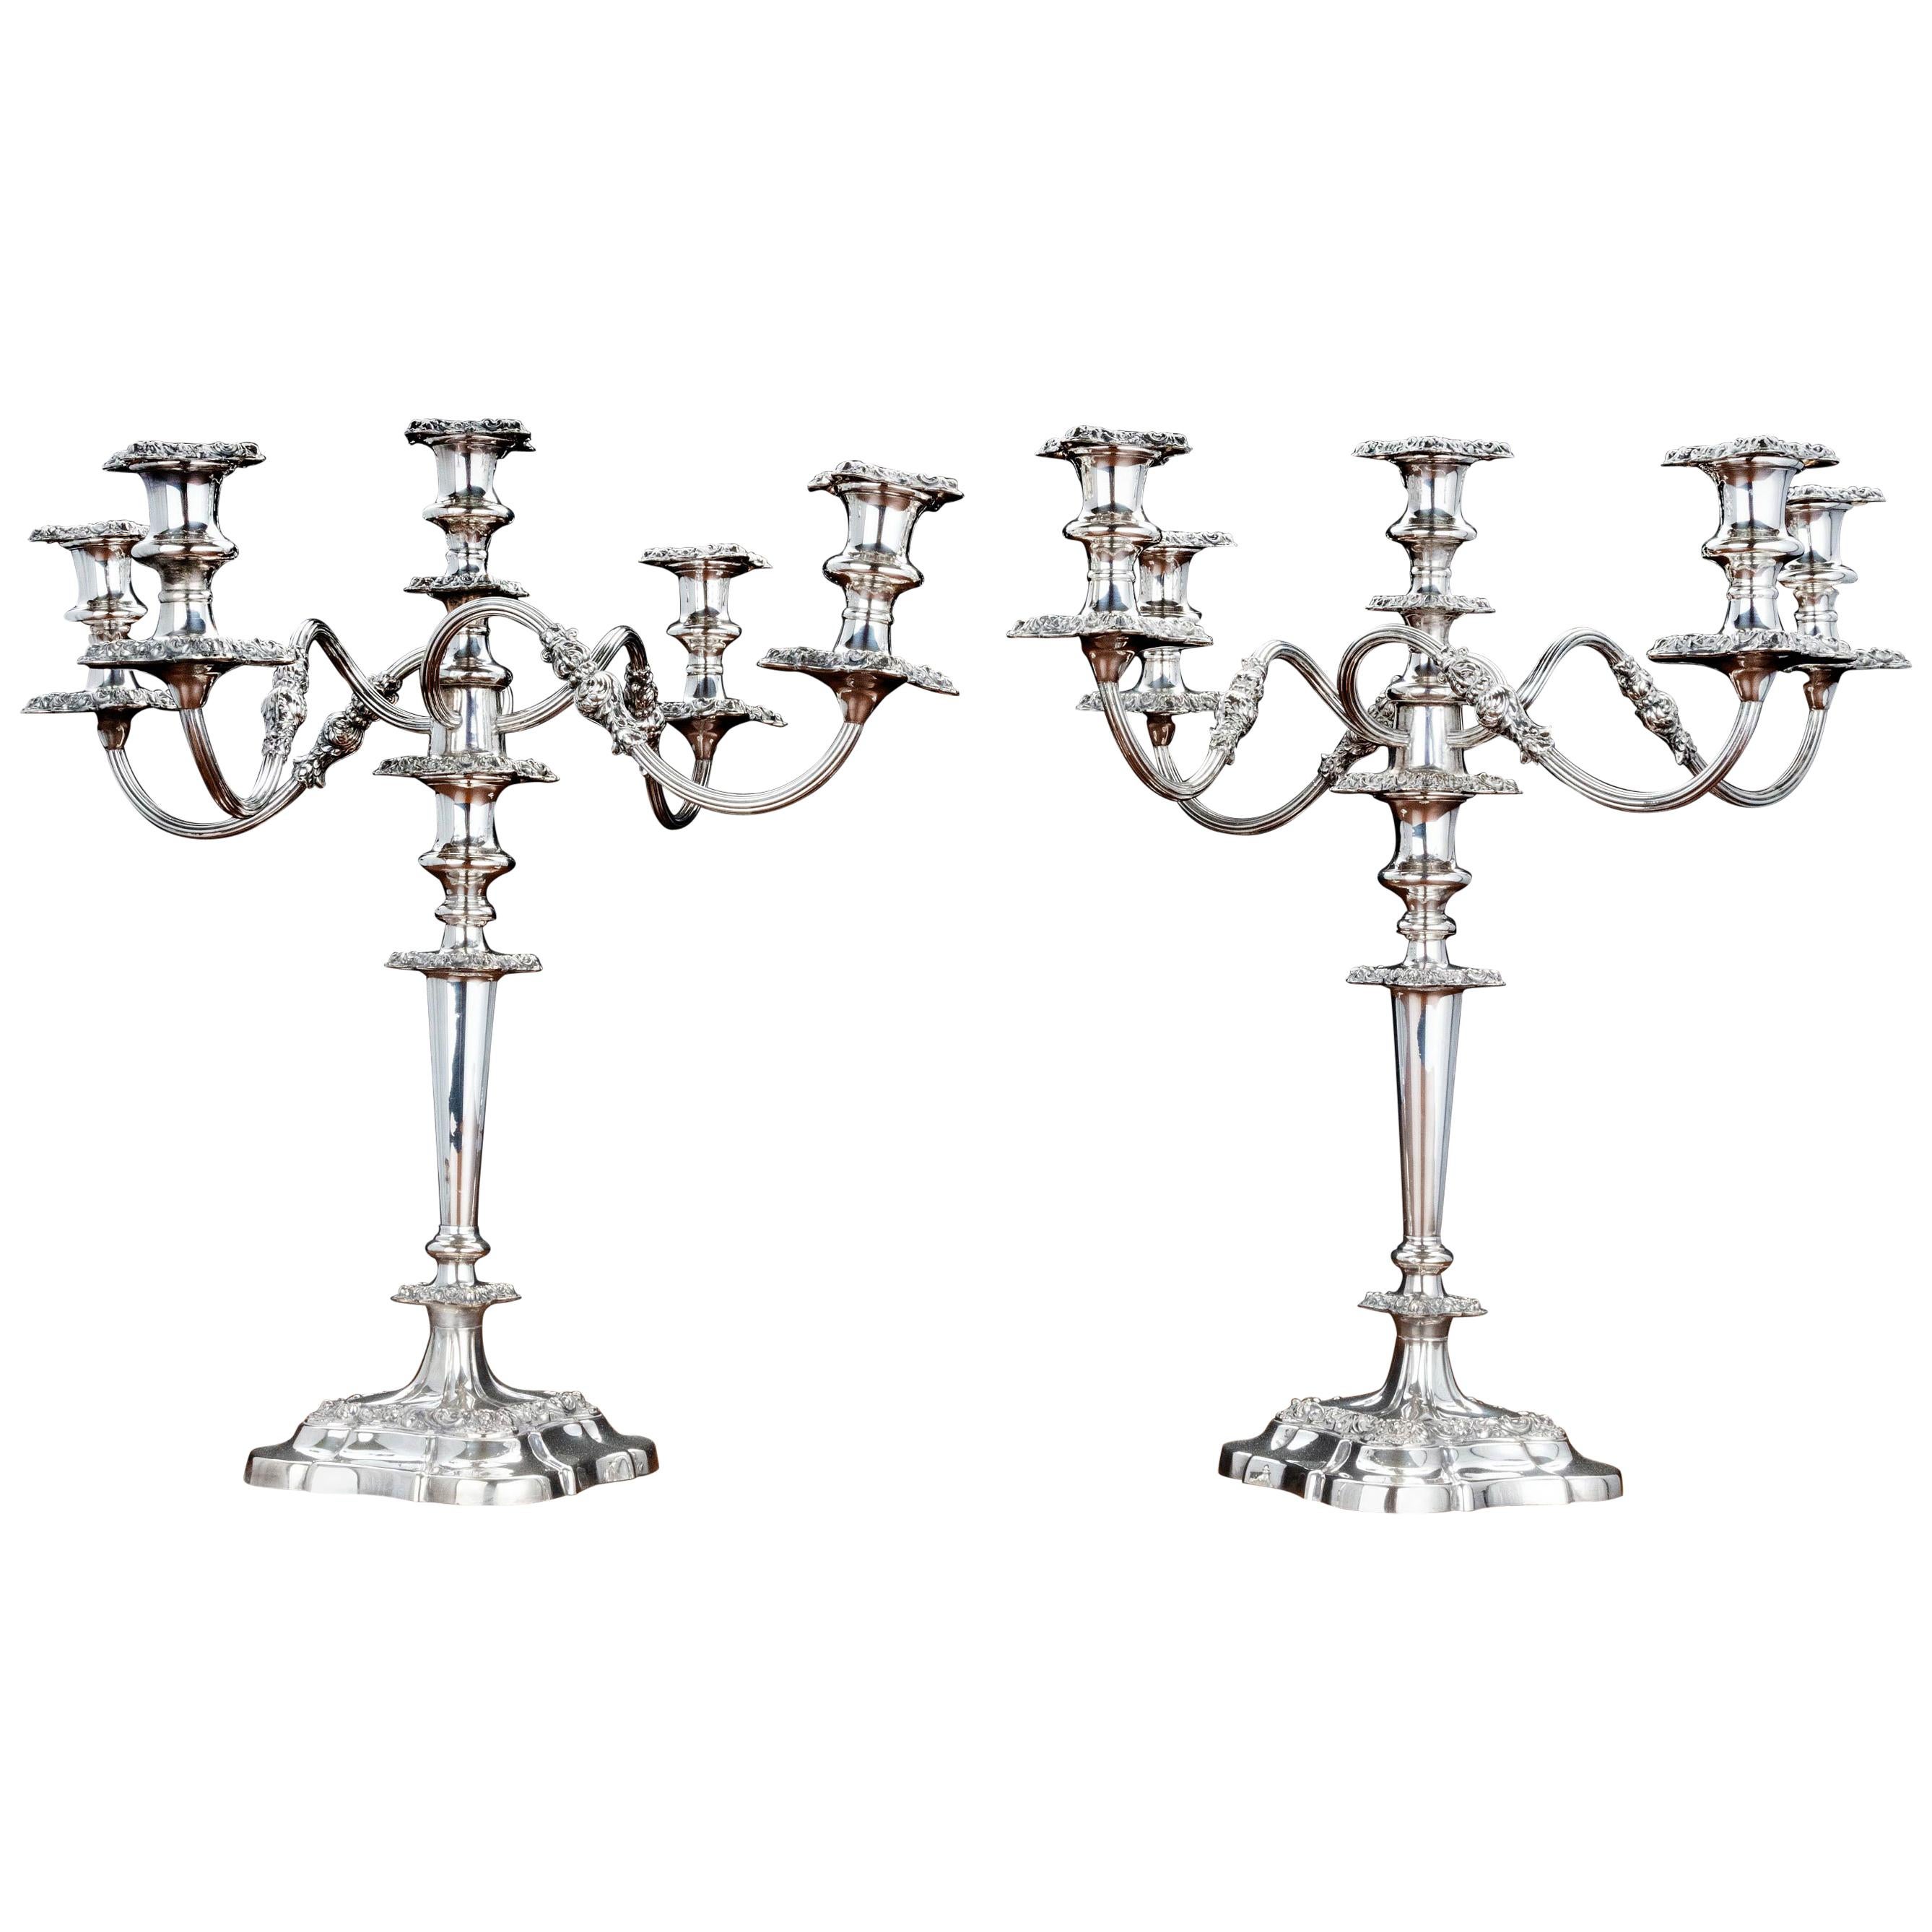 Pair of Late 19th Century Sheffield Plated Candelabras